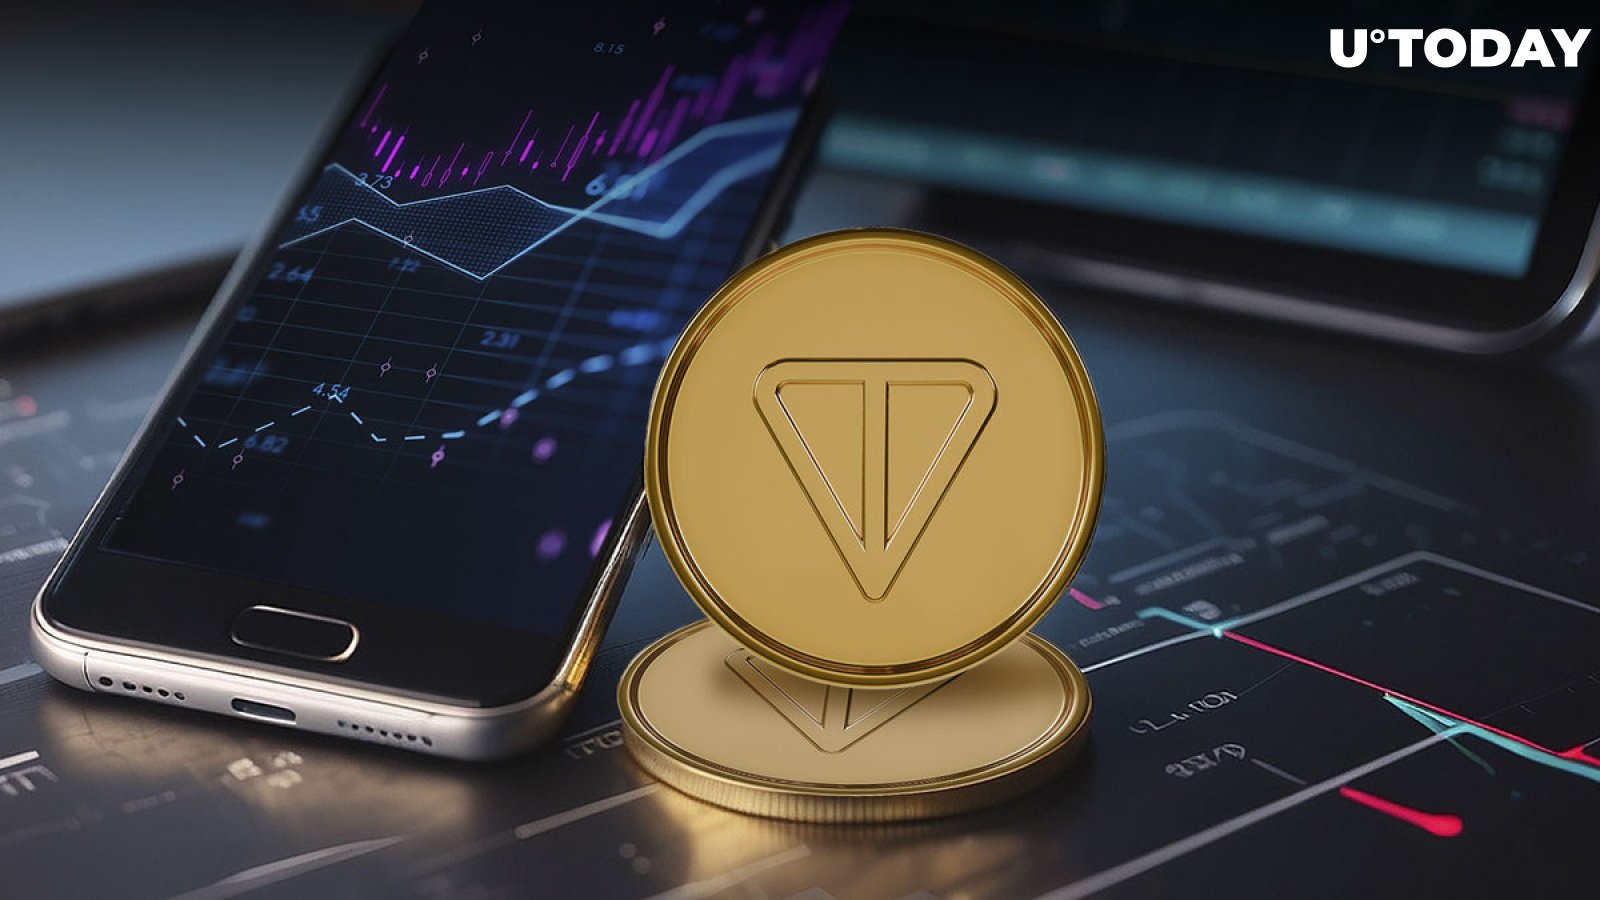 TON Coin Shows Top 2 Interest in Buying on Cryptocurrency Market